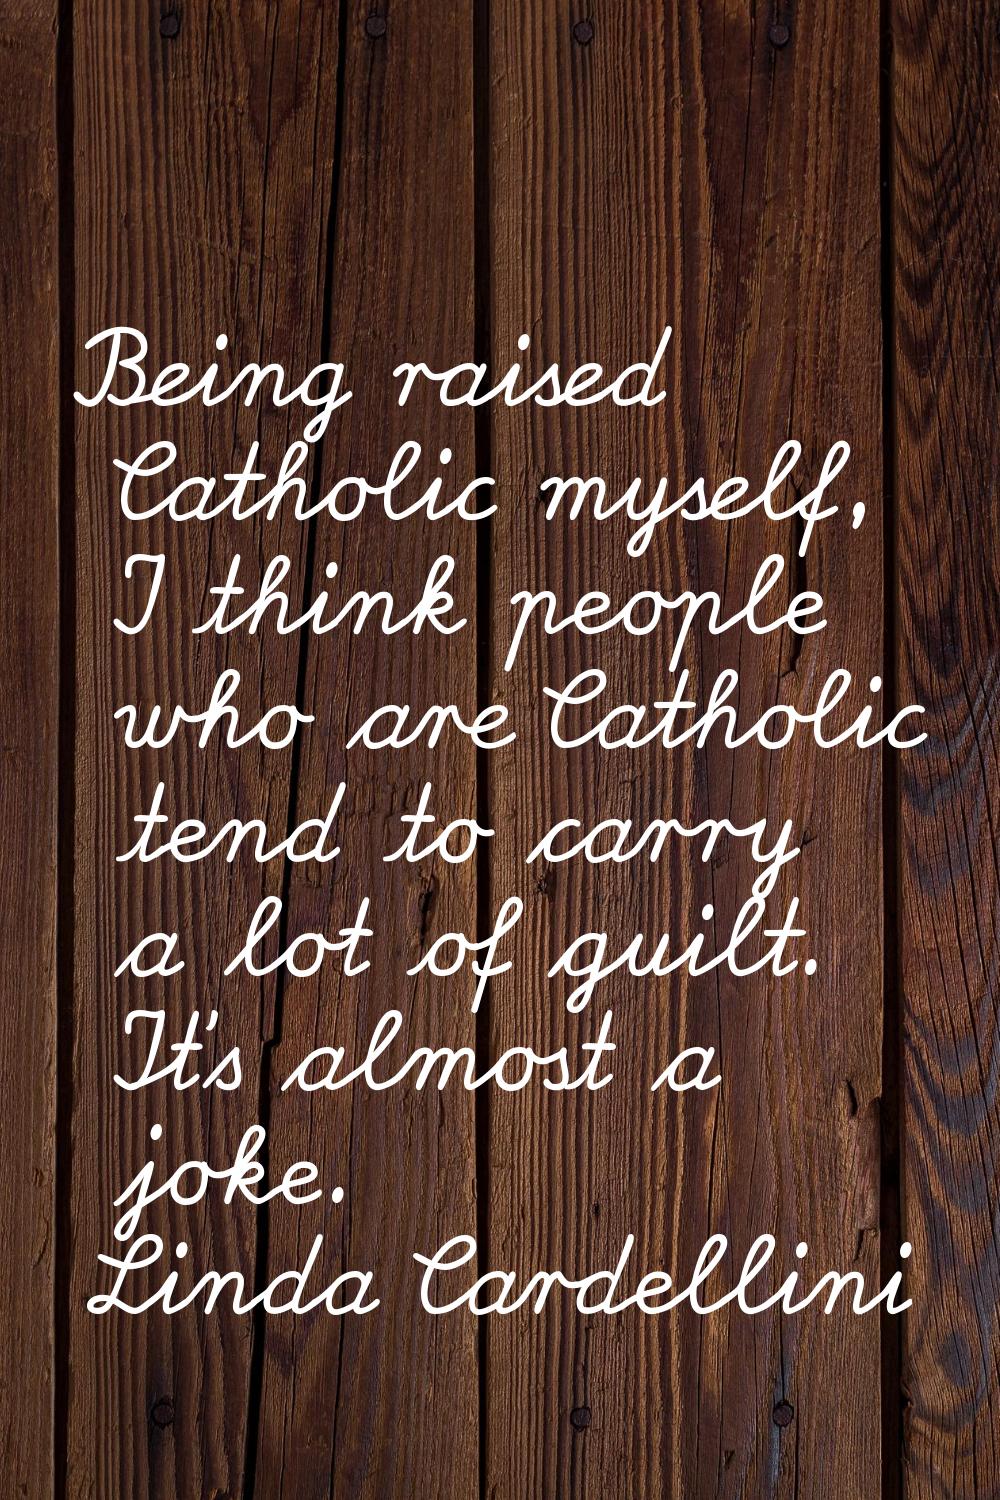 Being raised Catholic myself, I think people who are Catholic tend to carry a lot of guilt. It's al